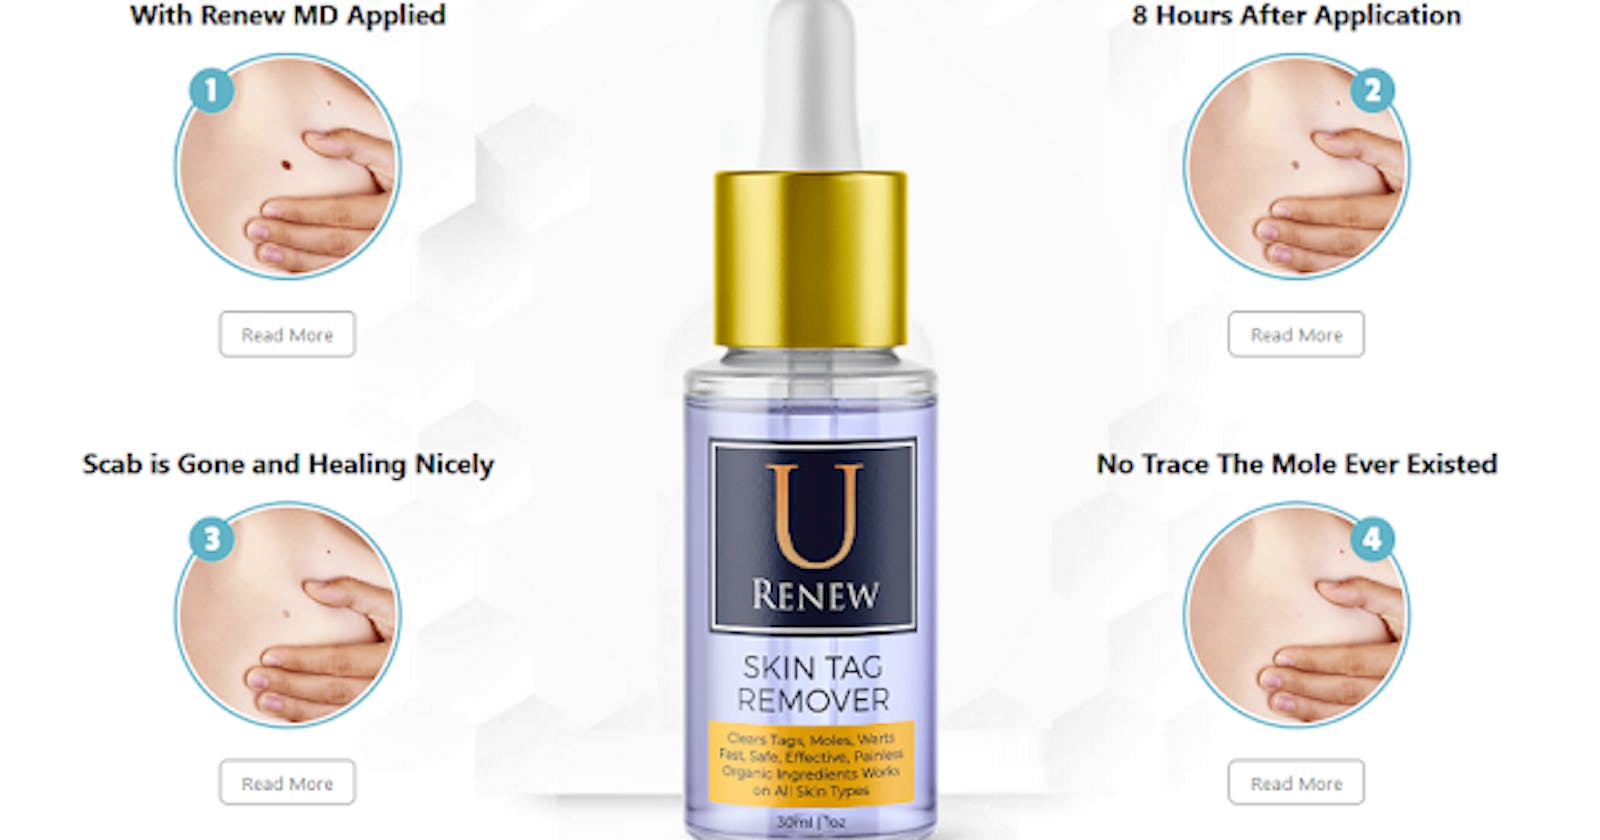 U Renew Skin Tag Remover - An Anti-Aging Formula For Wrinkle-Free Skin! Does It Work?